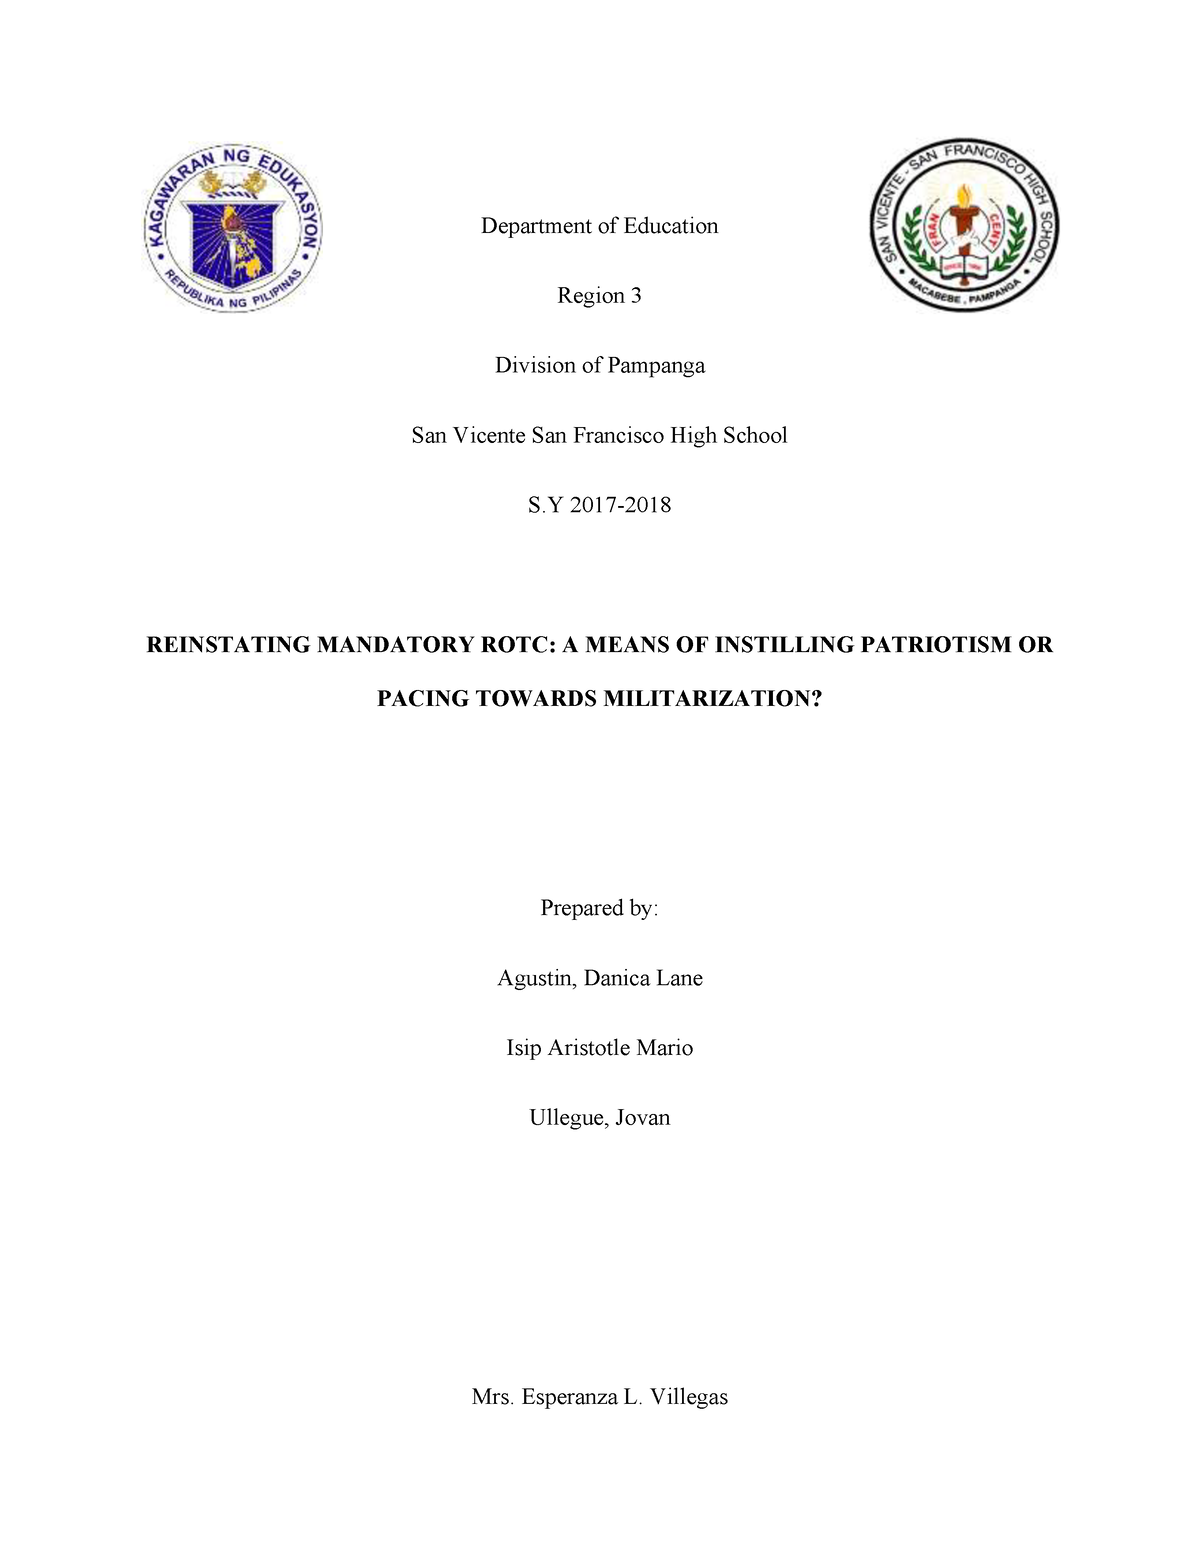 thesis about rotc